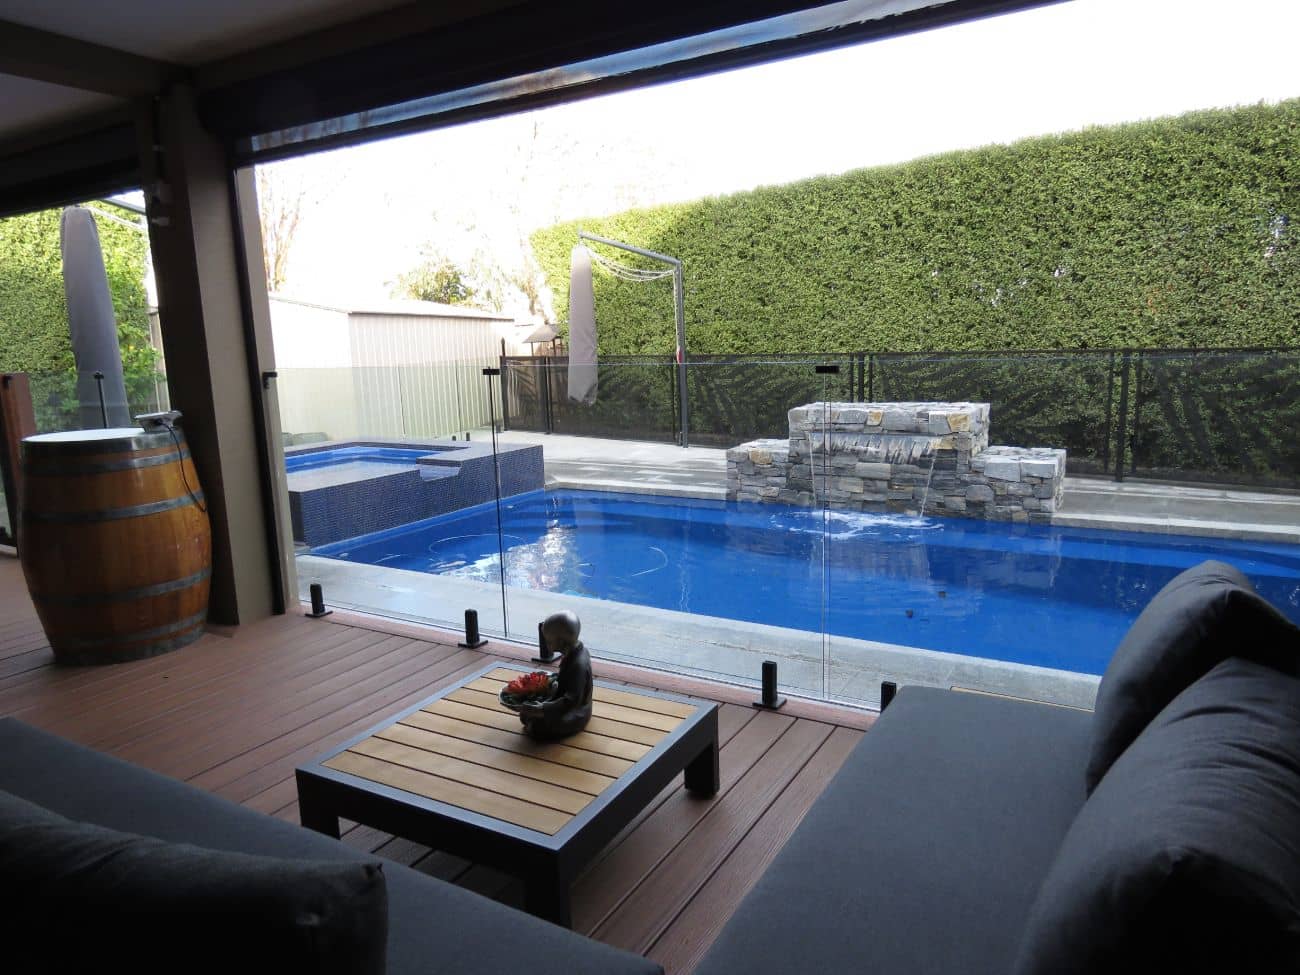 View of pool from alfresco